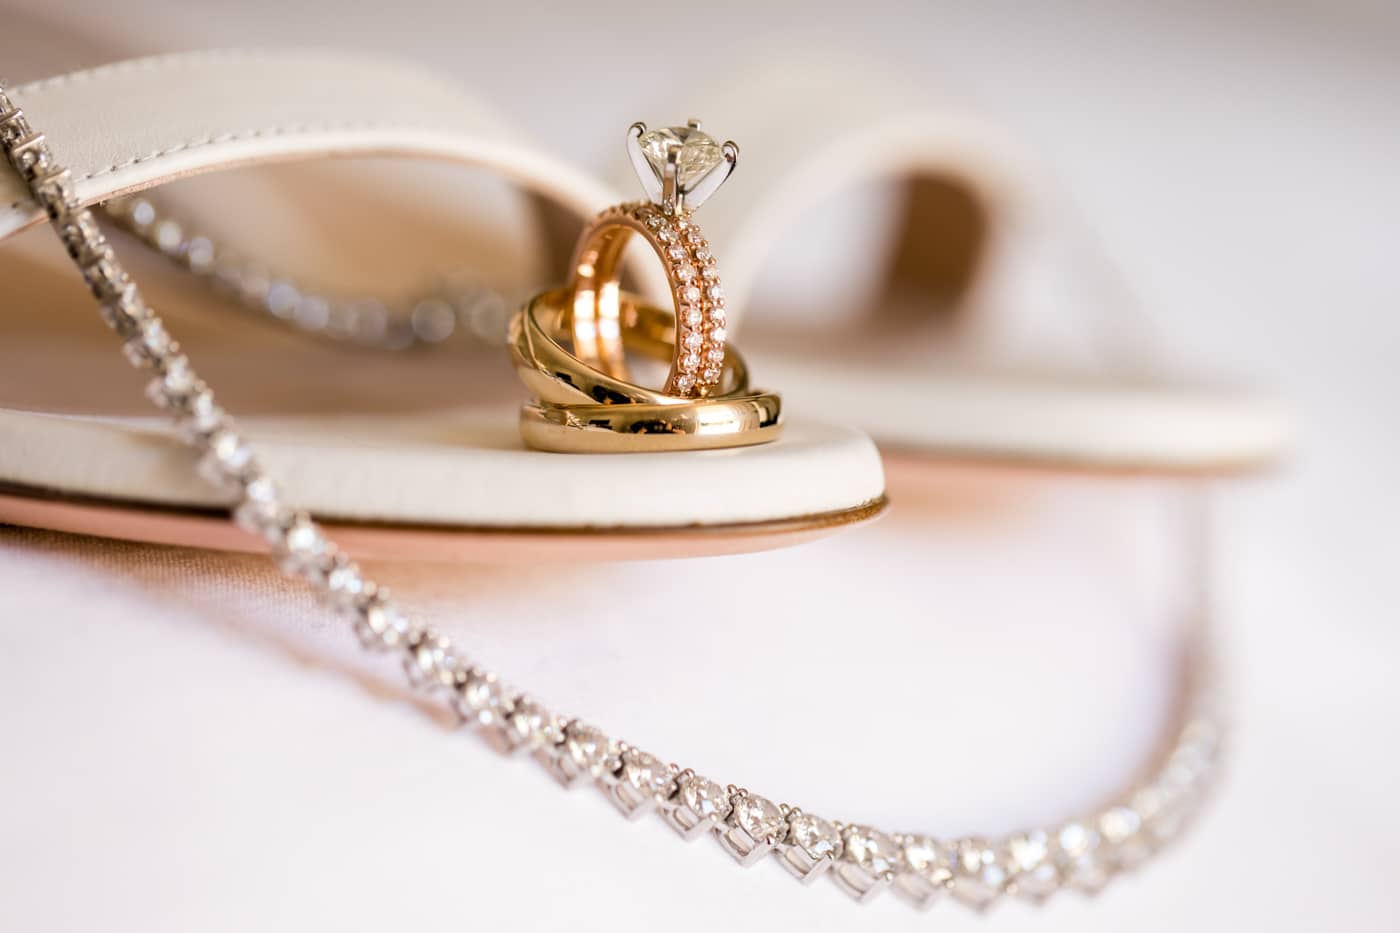 Close up shot of wedding rings, shoes, and jewelry